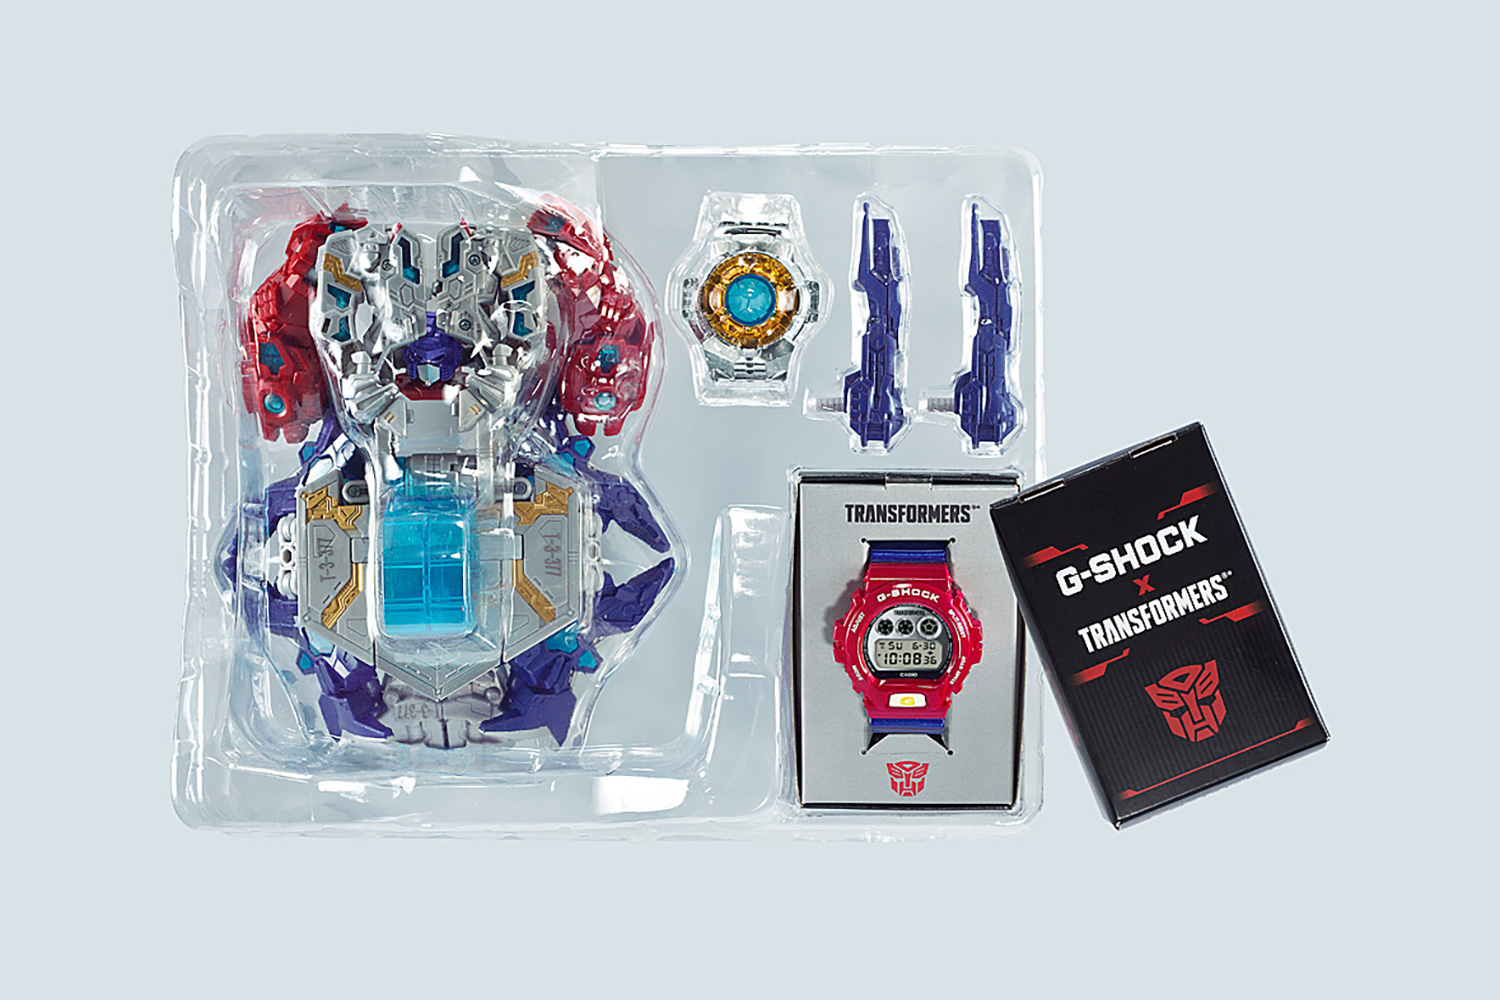 Casio to Release G-SHOCK x TRANSFORMERS Special Collaboration Model in Dec 2018